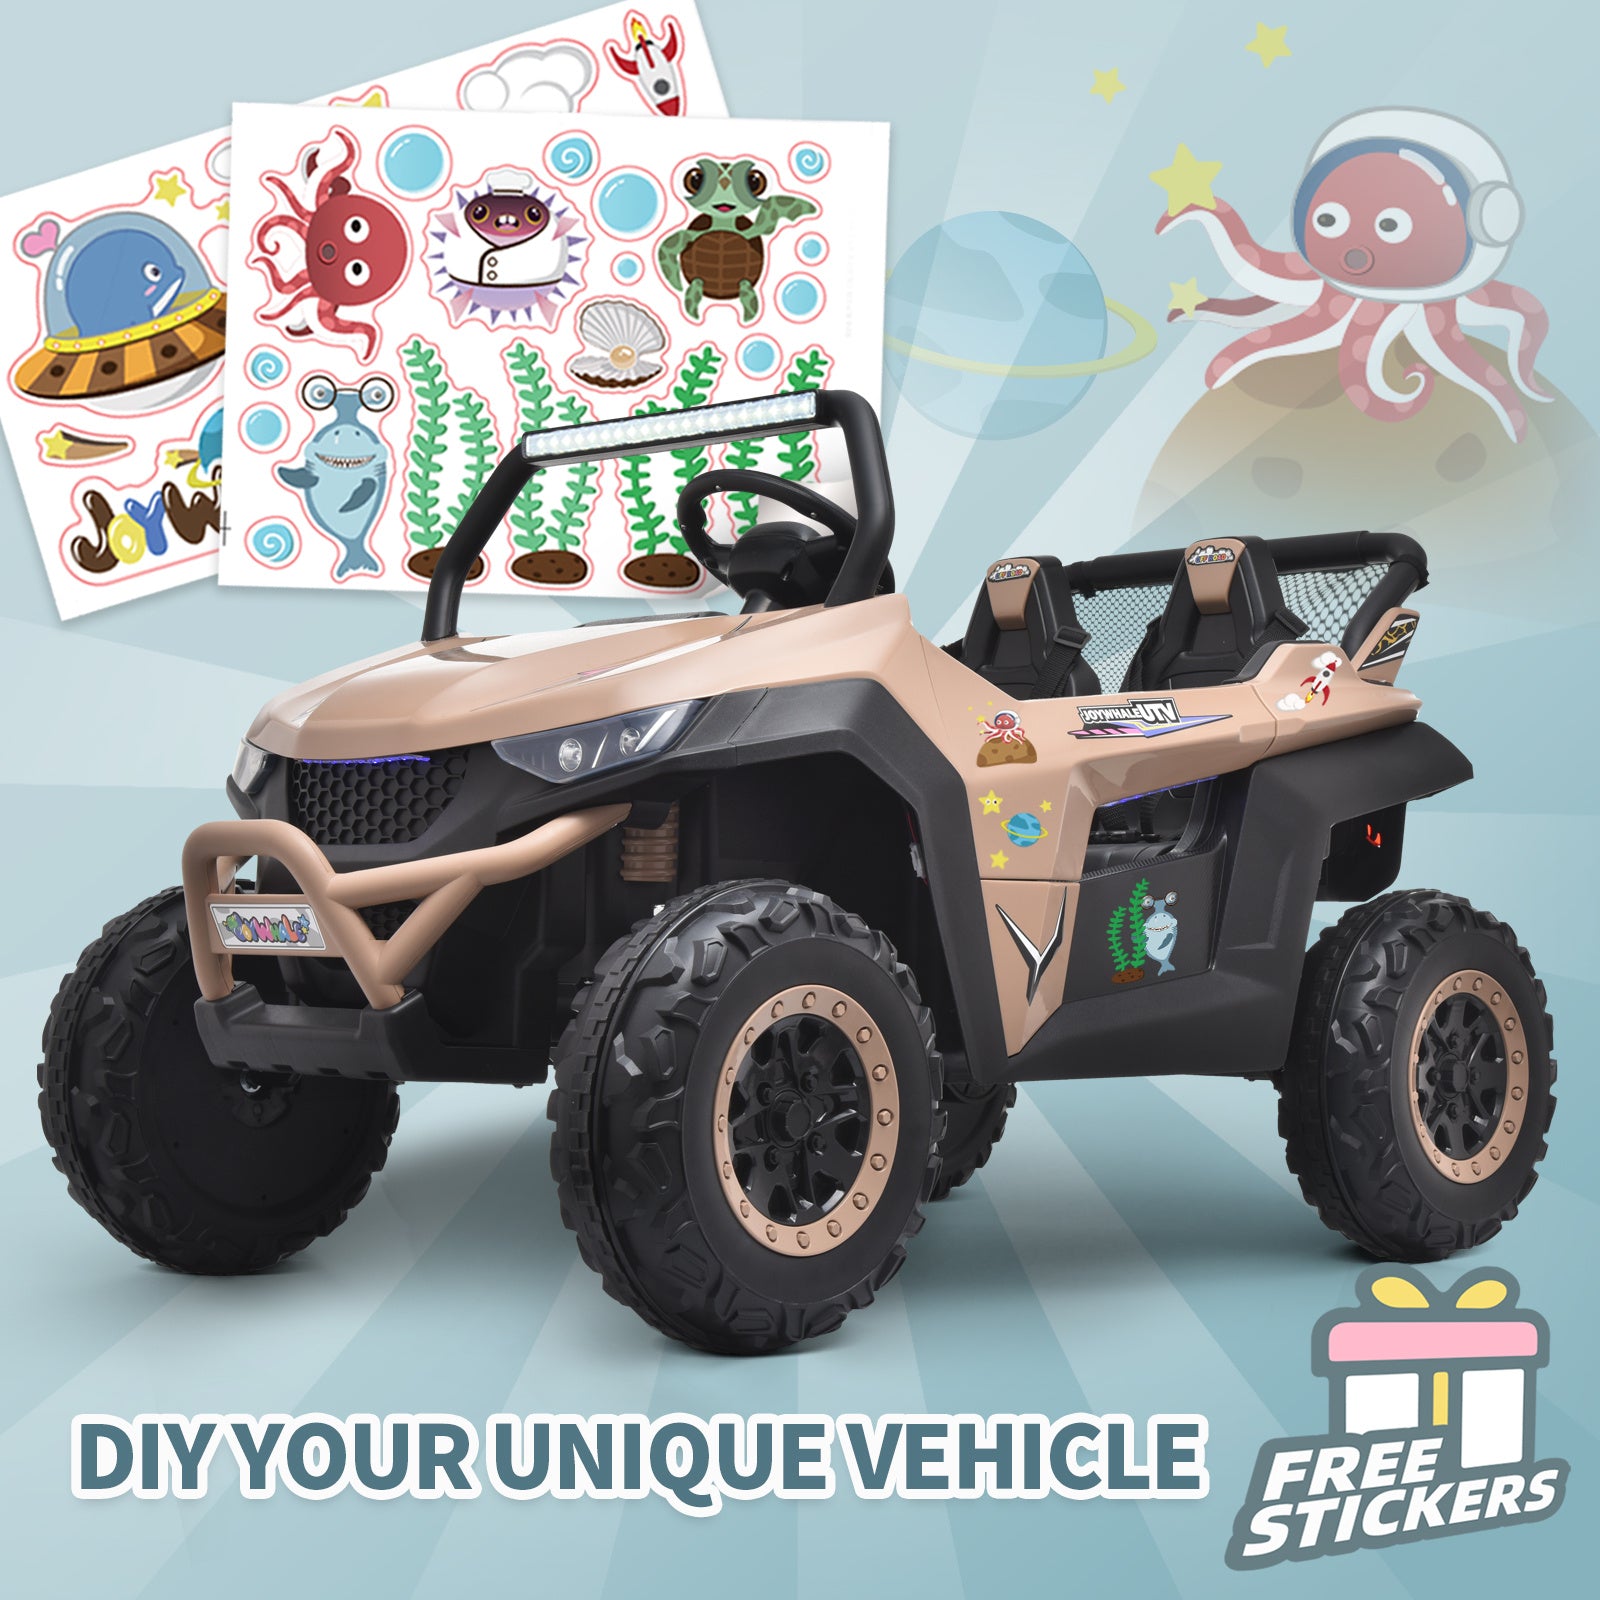 12V 2 Seater Kids Ride on UTV Battery Powered Car Electric Vehicle for Kids, with 7AH Big Battery, 2.4G Remote Control, Metal Suspension, Bright Headlights, Music Bee's to Find